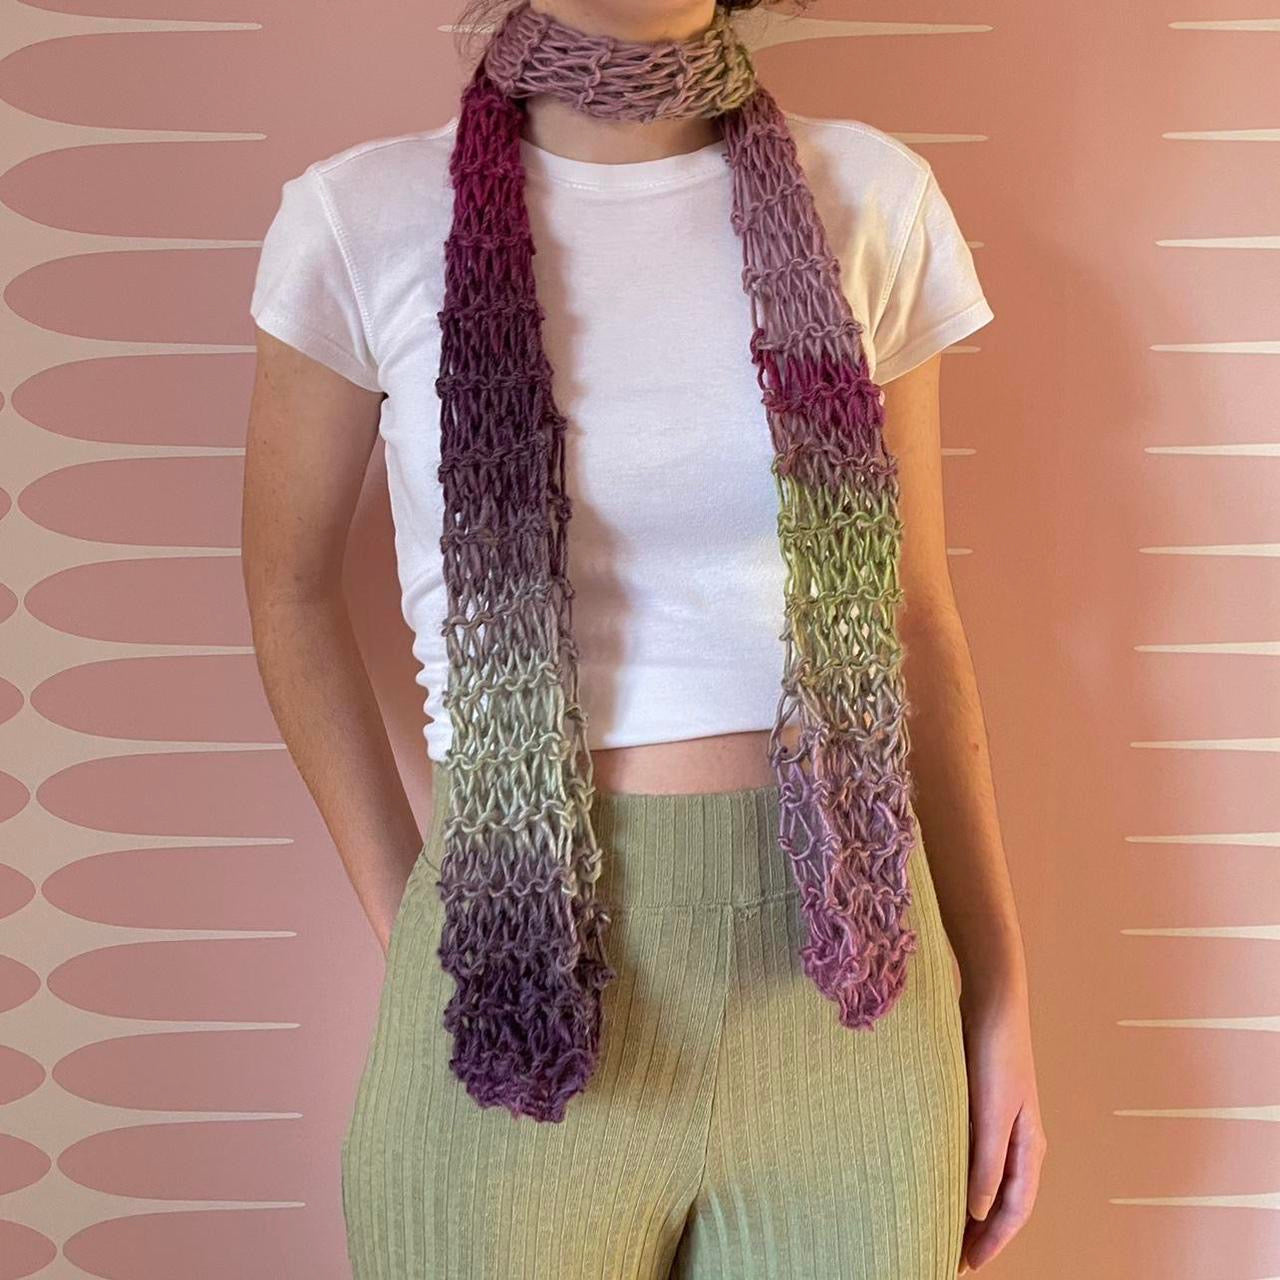 Handmade loose knit scarf in ombré green and purple